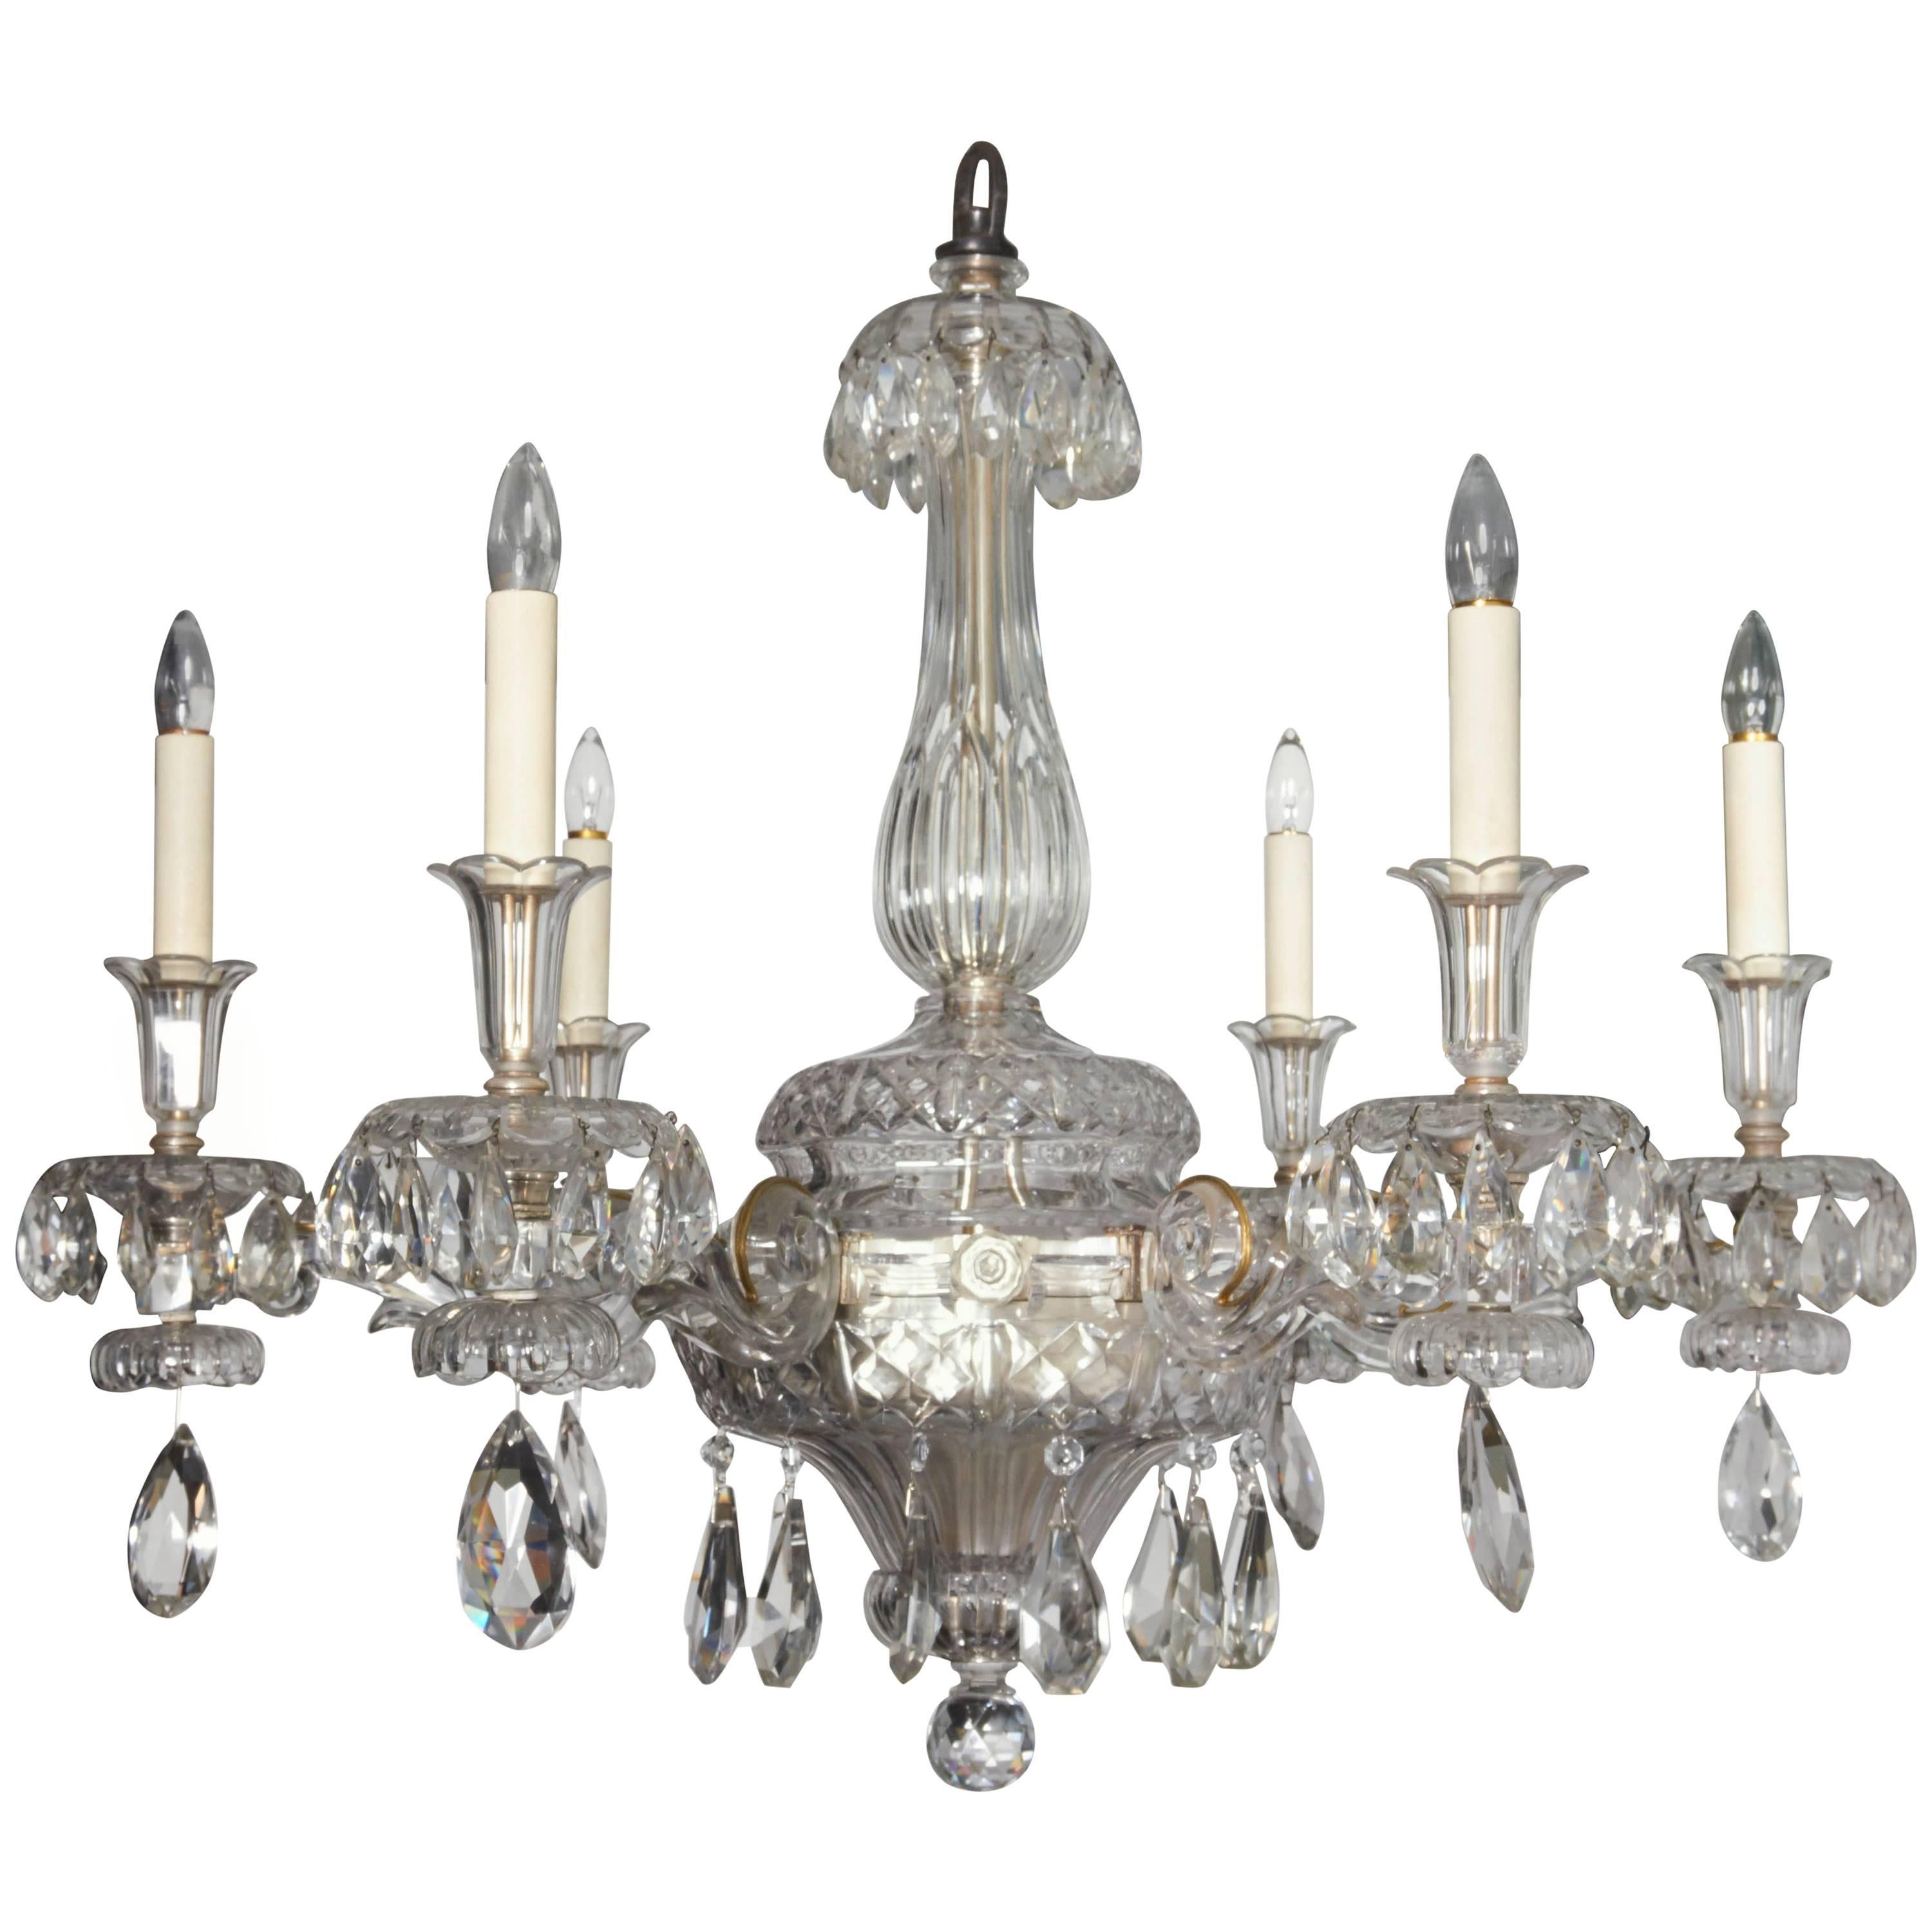 An Exceptional French Art Deco Molded and Cut-Crystal Six-Light Chandelier